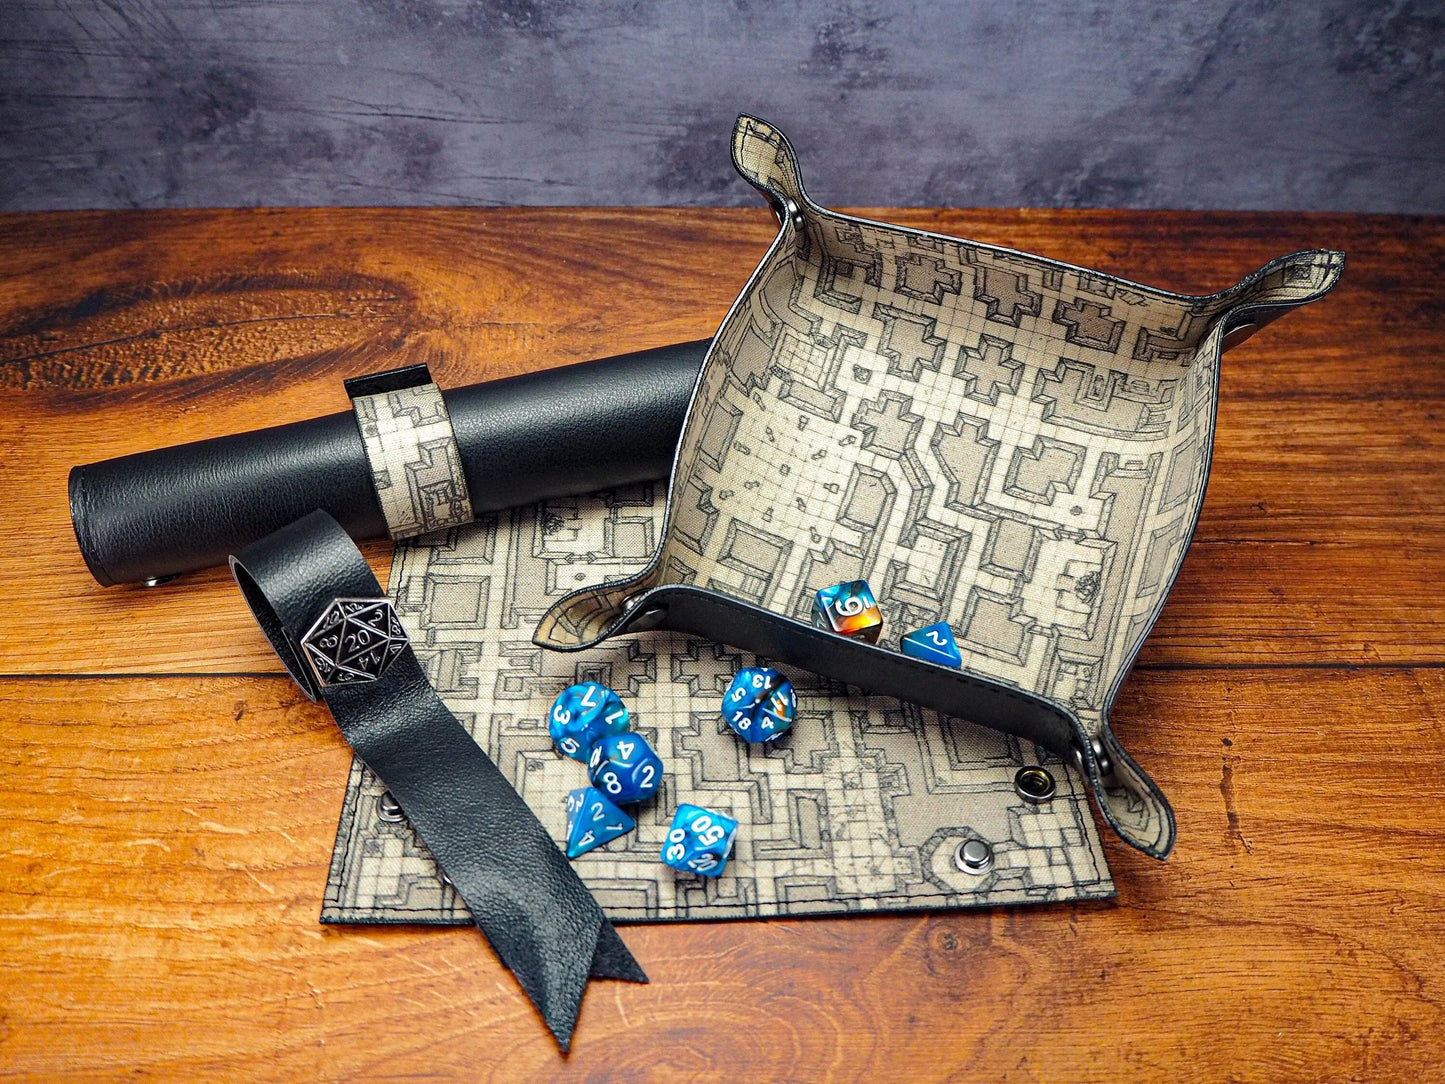 Canvas Map and Leather Dice Tray - Leather Valet Tray and Catch All Tray. Fantastic Role Playing Game EmBrace Leather